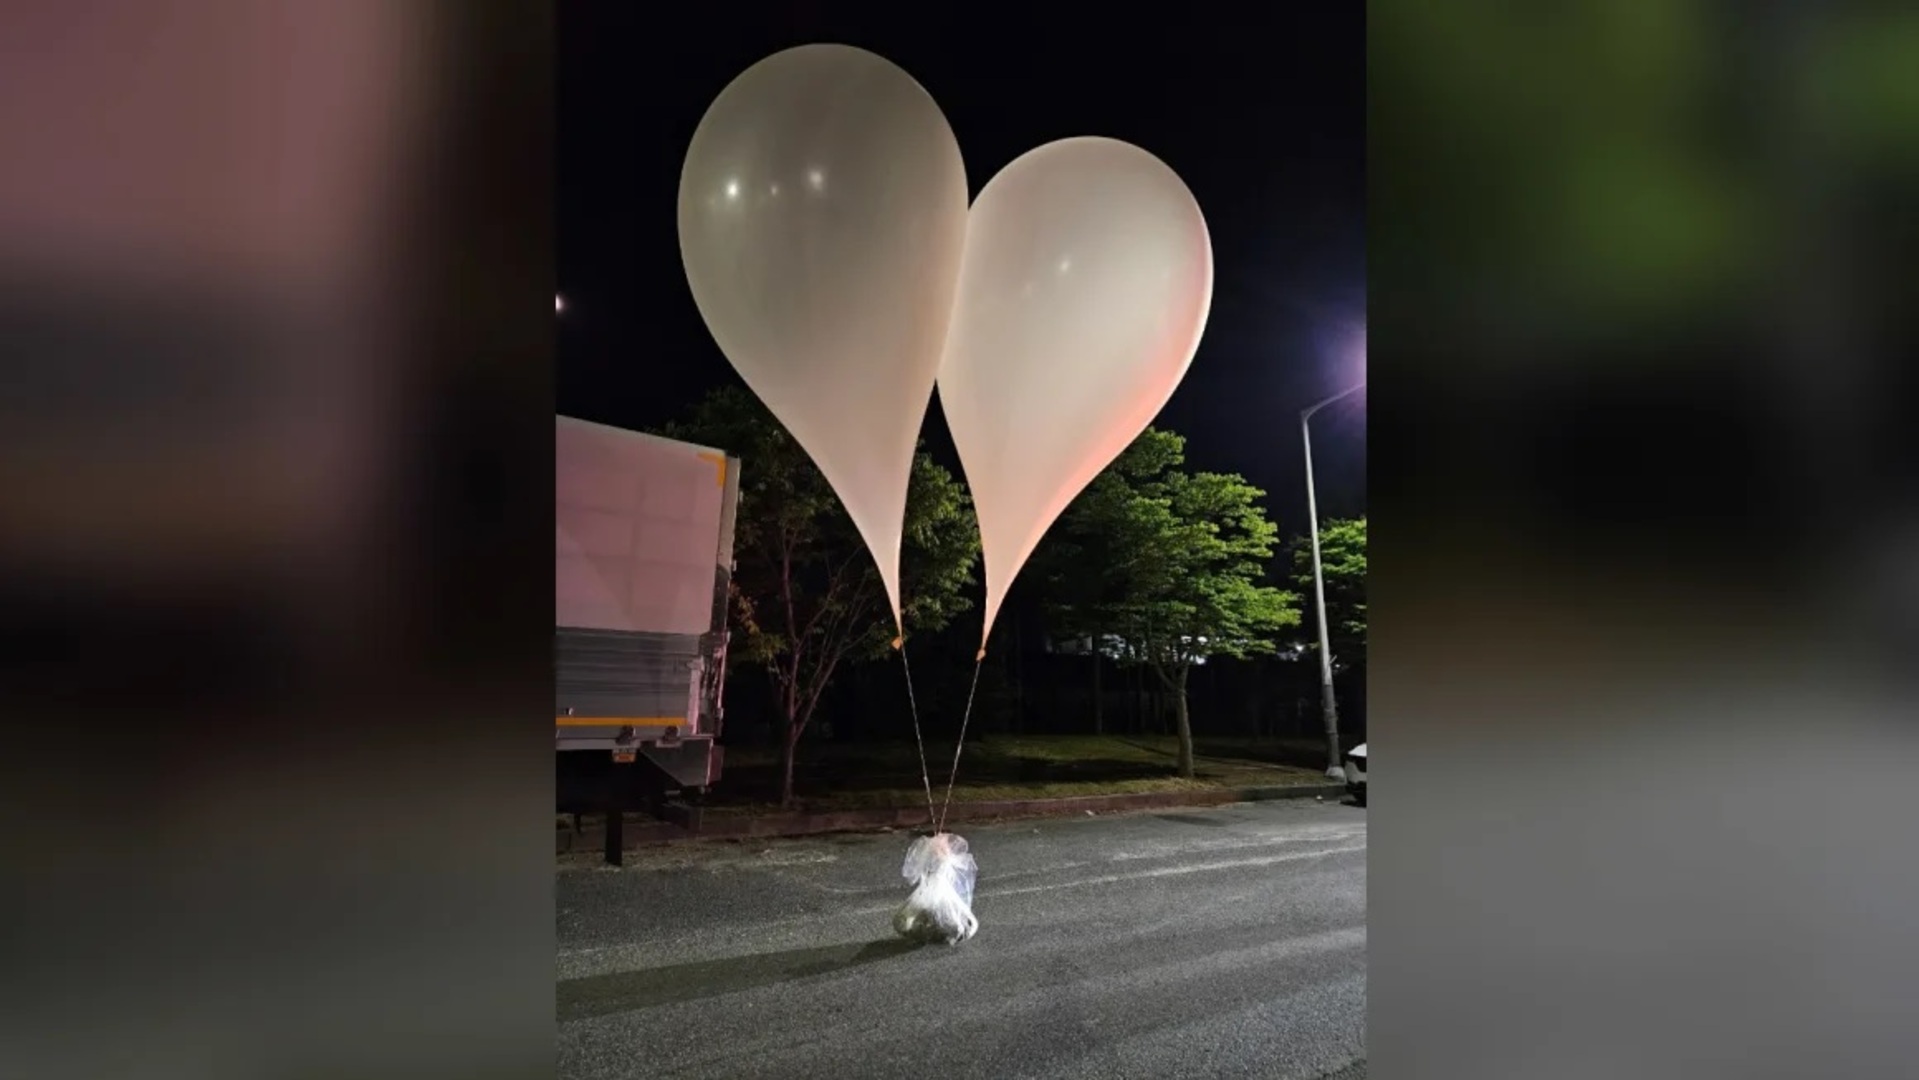 North Korea sends balloons with excrement and trash into South Korea